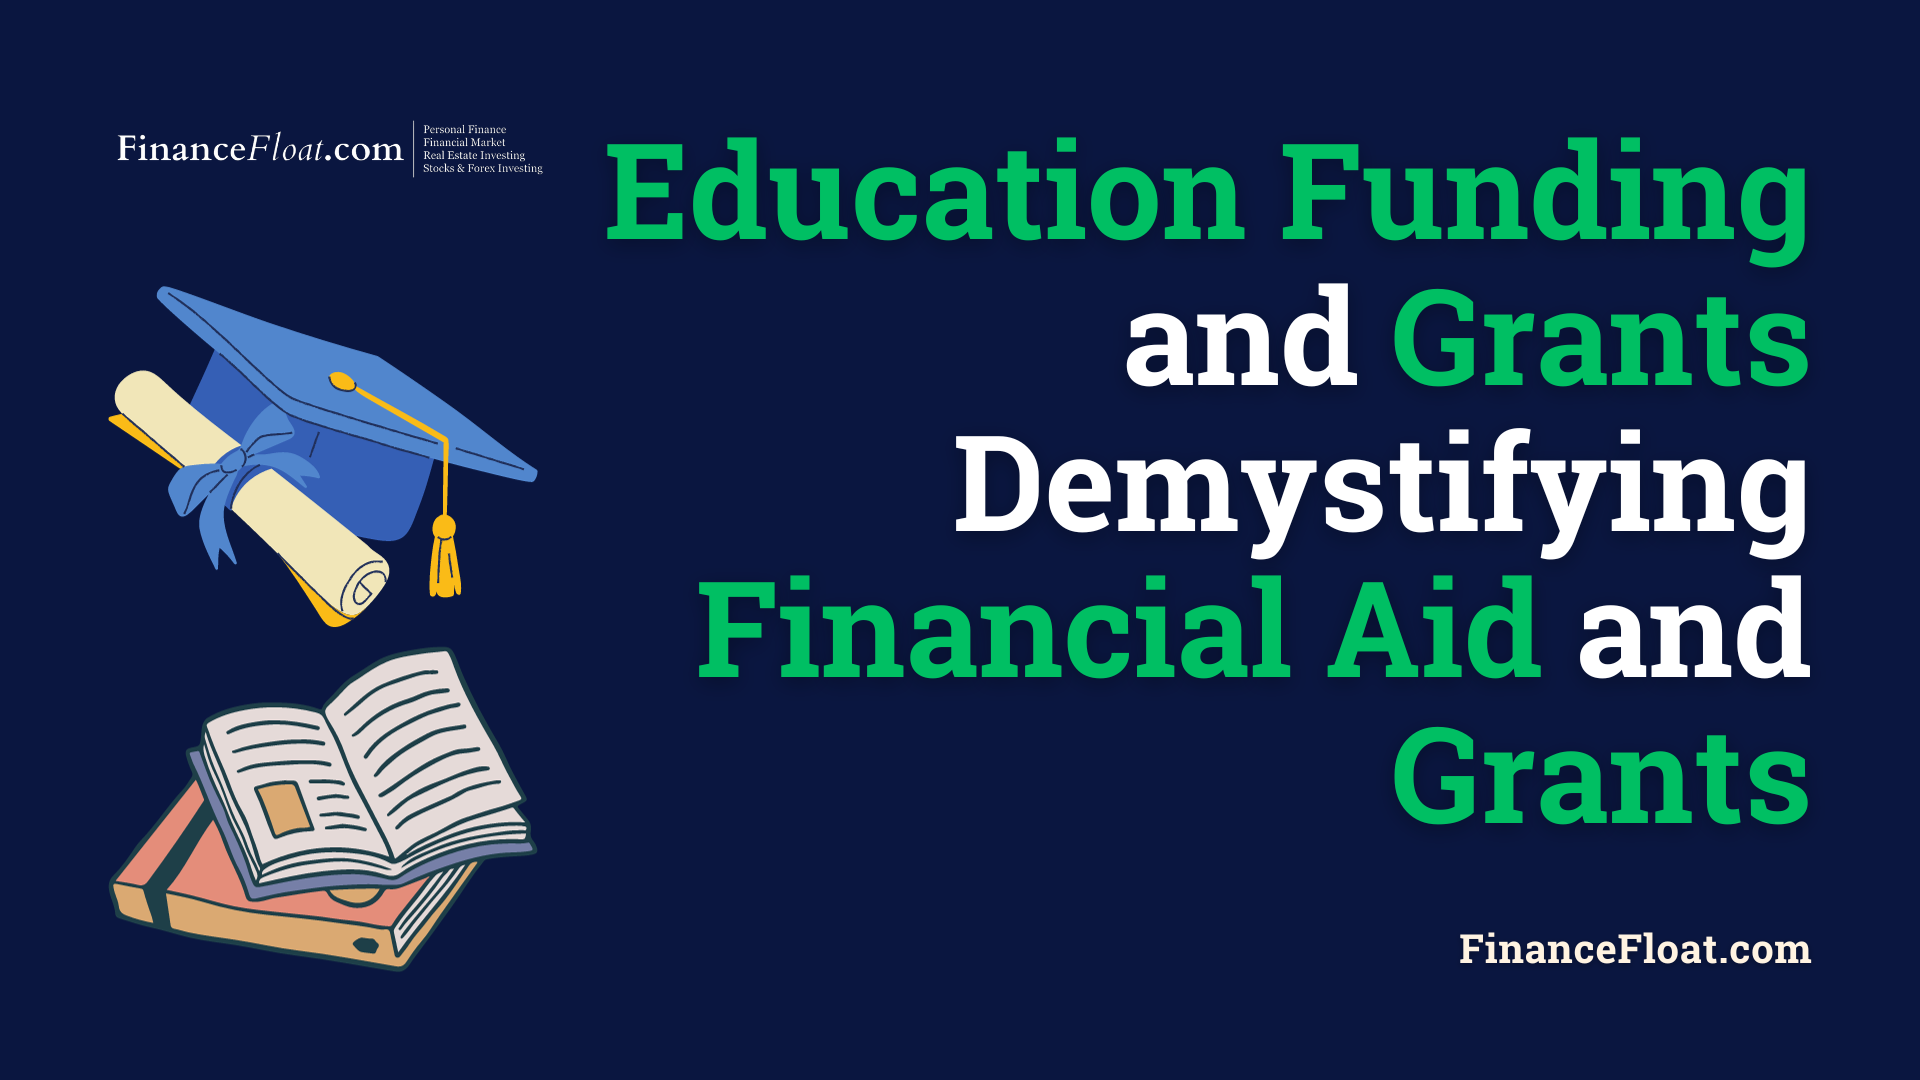 Education Funding and Grants Demystifying Financial Aid and Grants